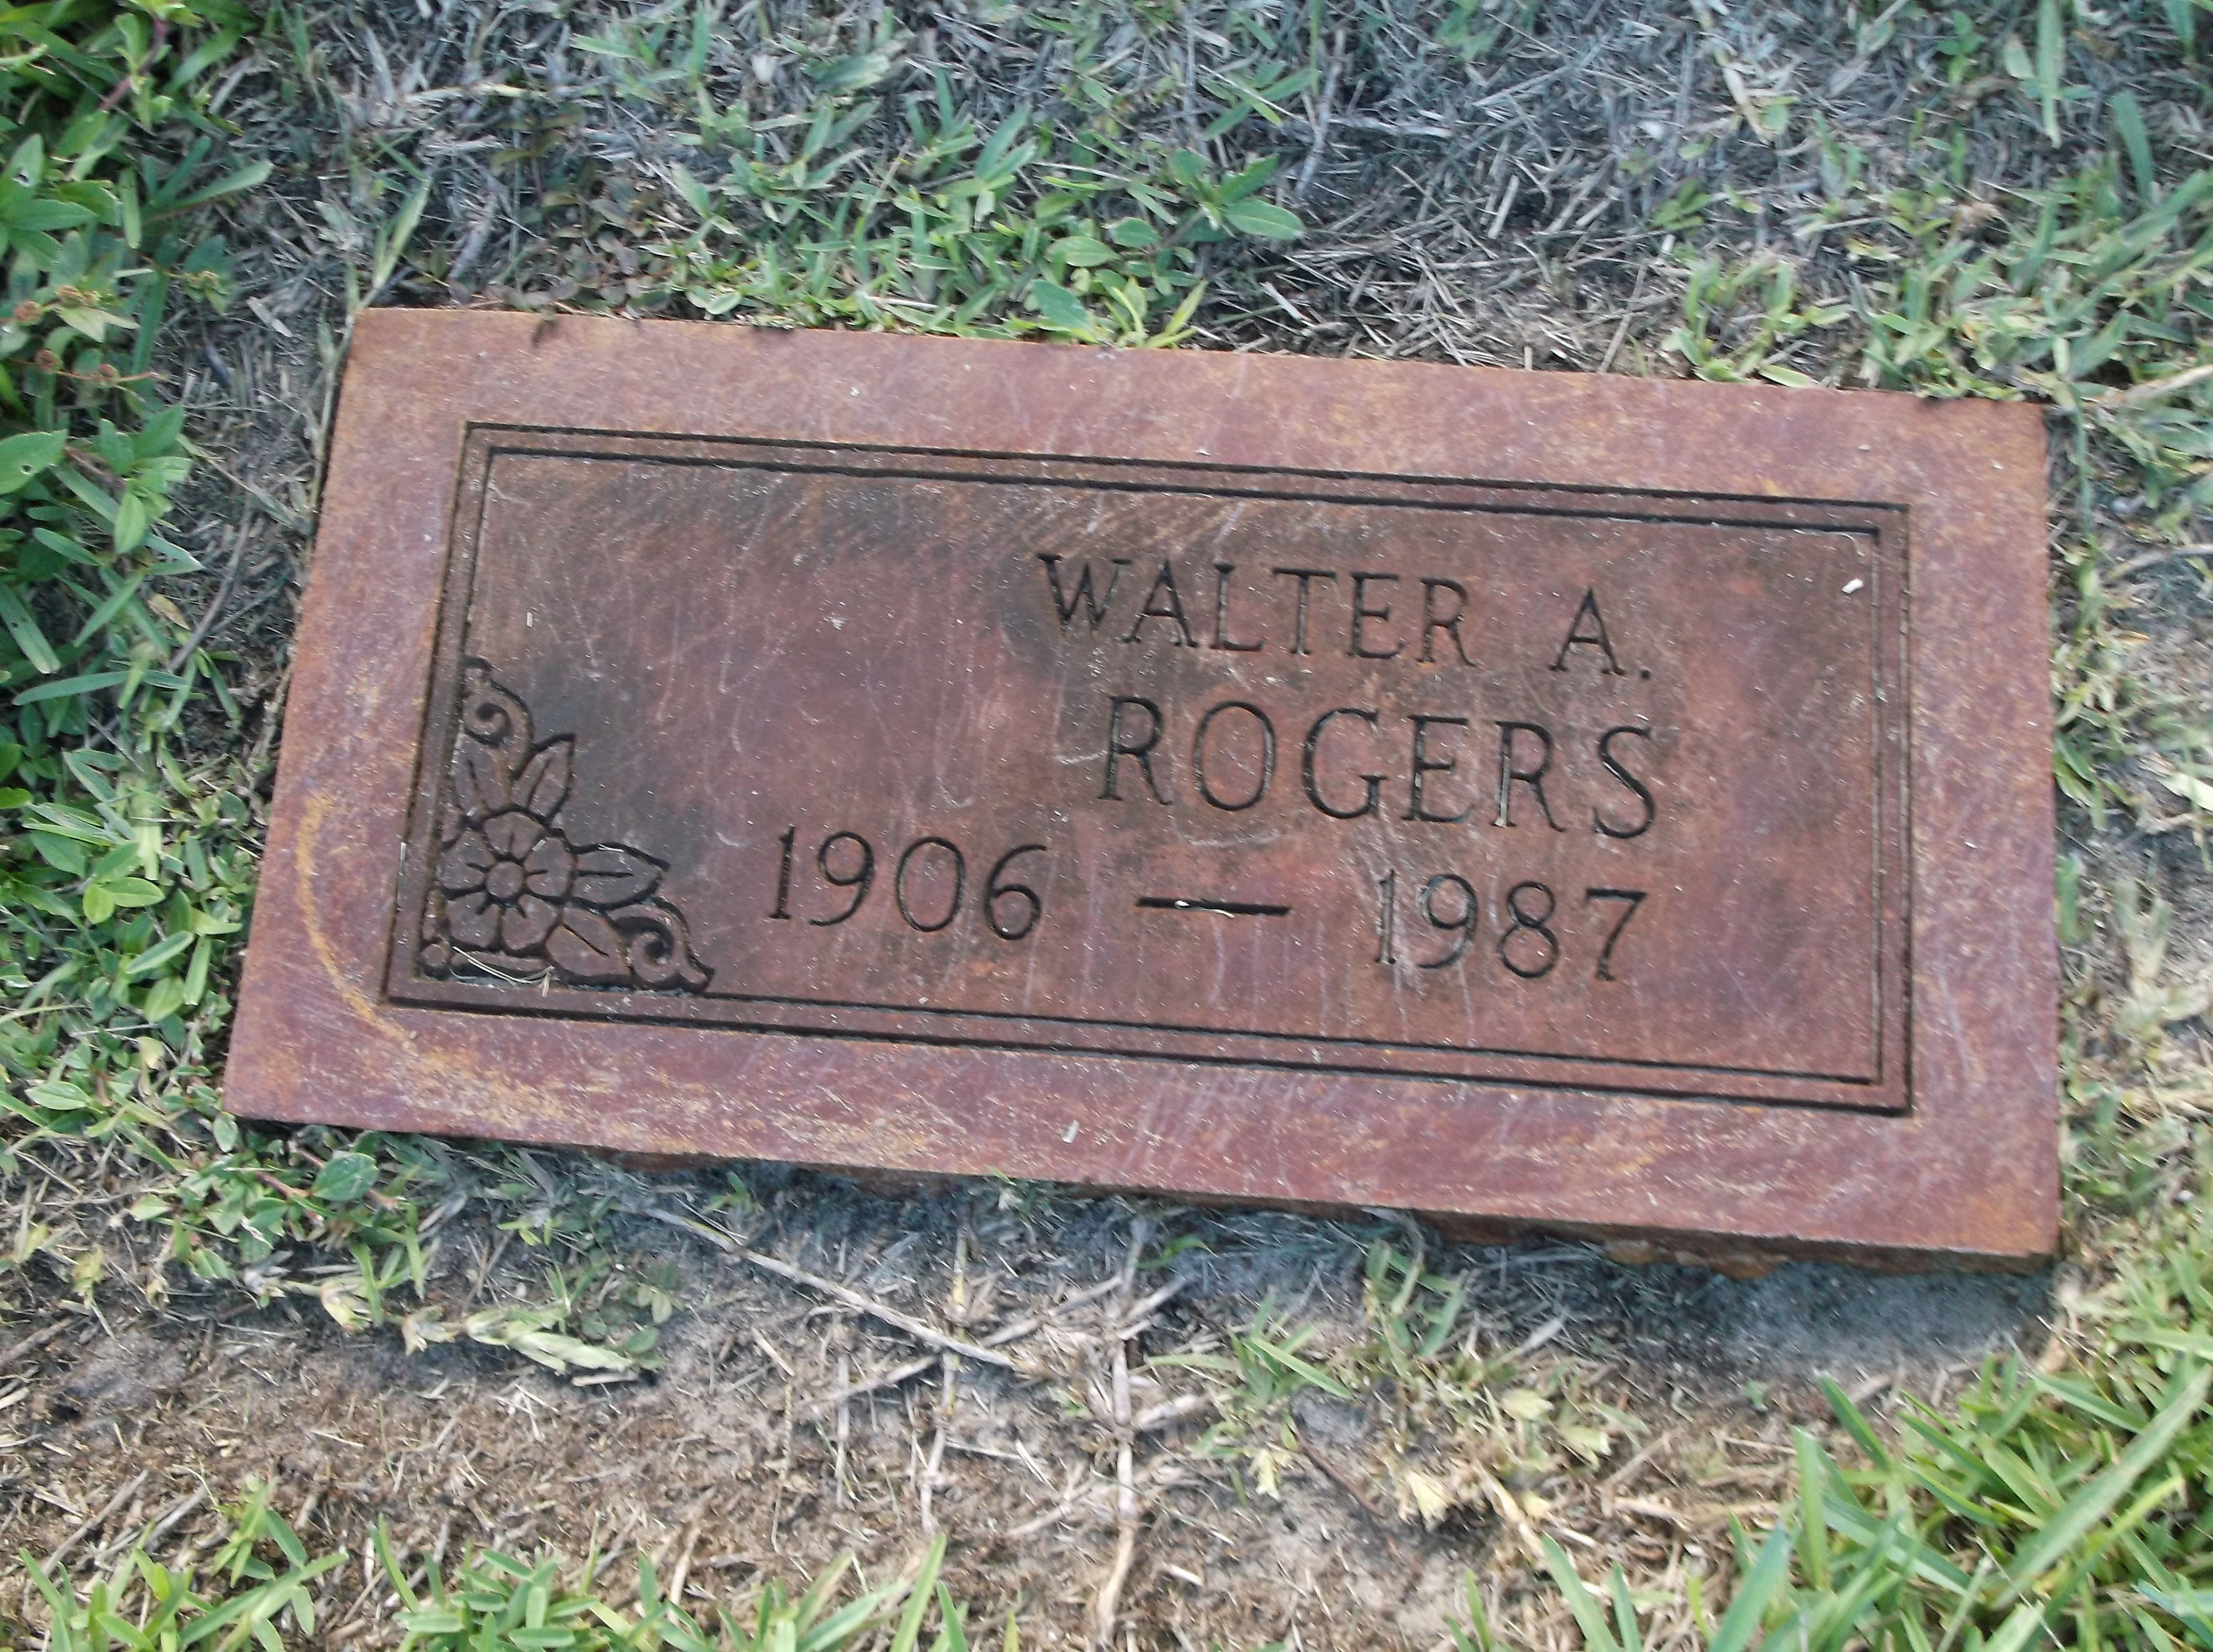 Walter A Rogers